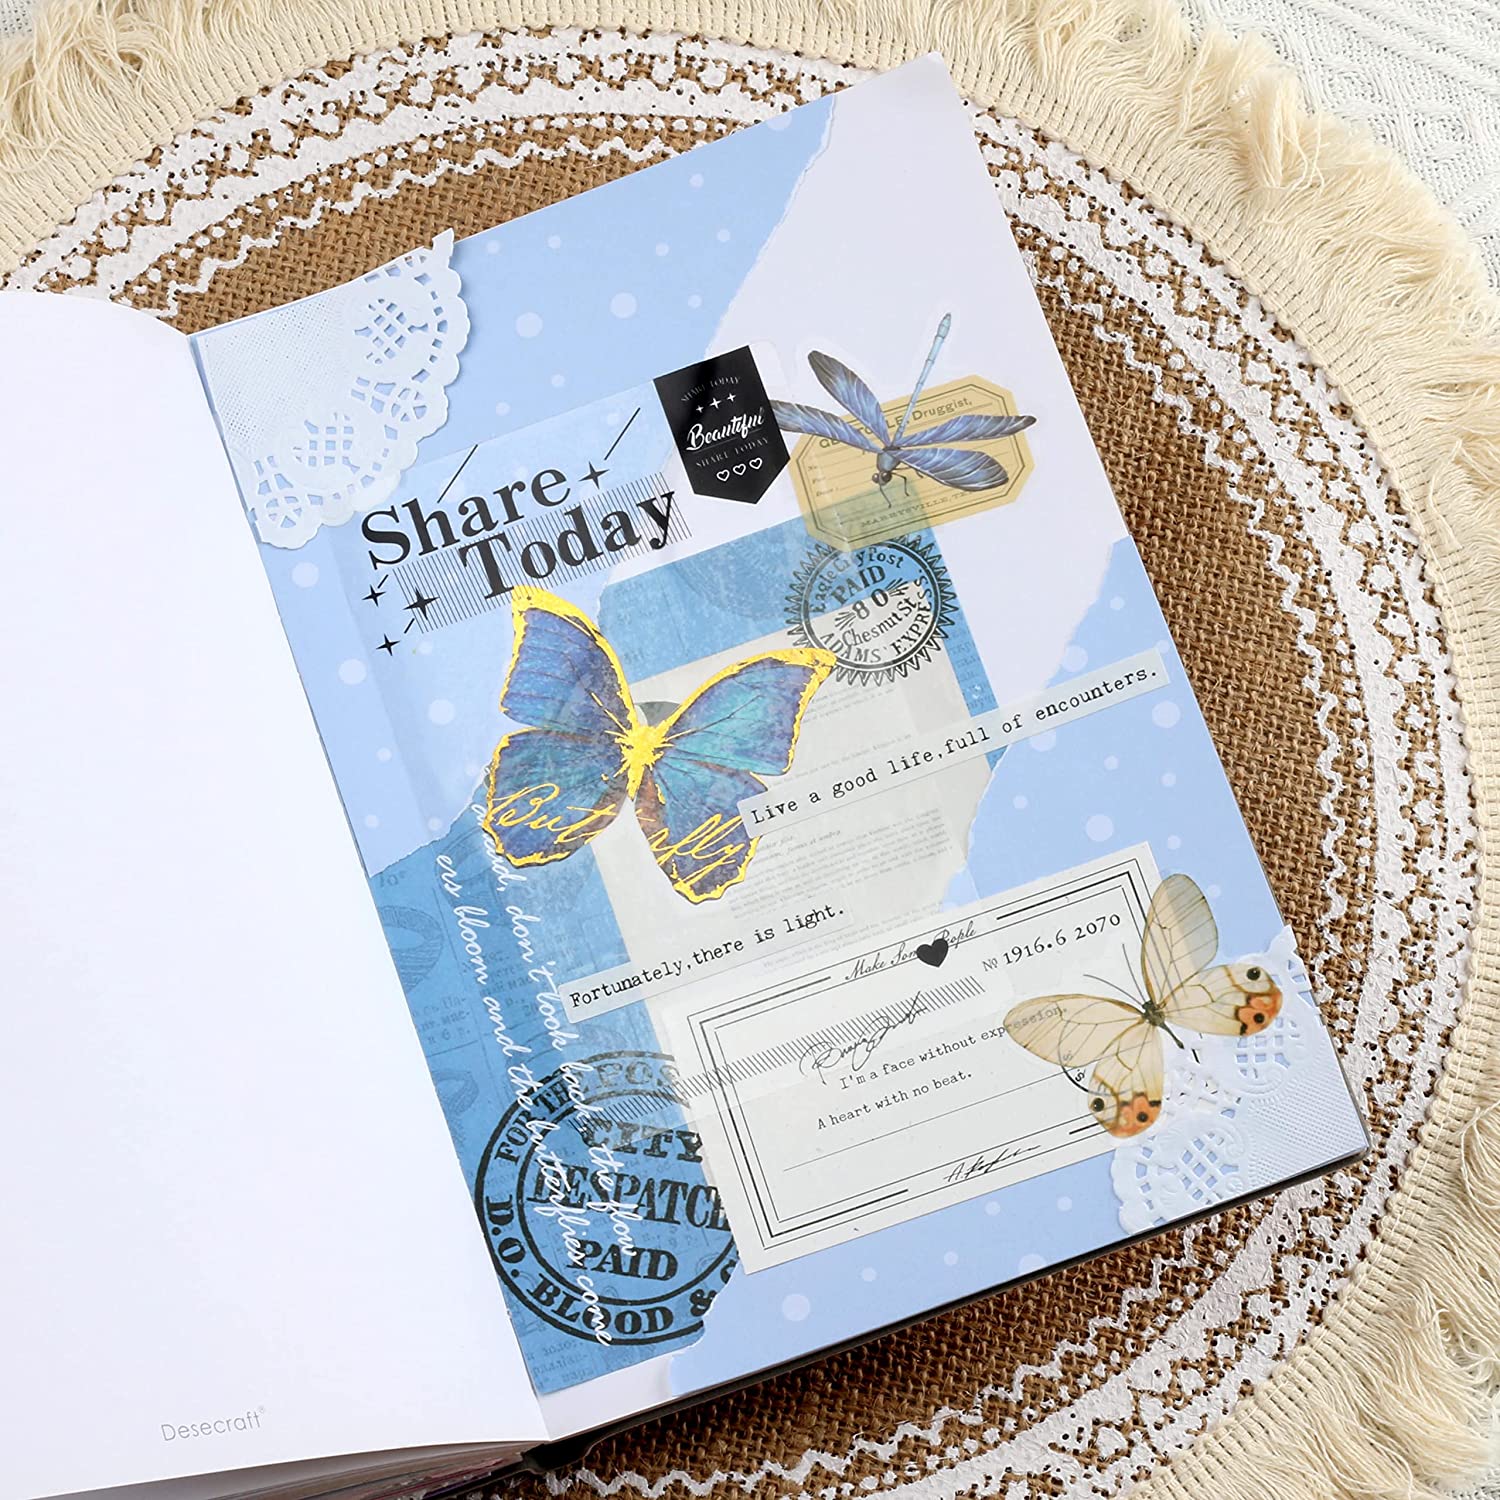 wedding scrapbook paper: A double-sided craft paper pad designed for  scrapbooking, mixed media art, and journaling, specifically tailored for  weddings